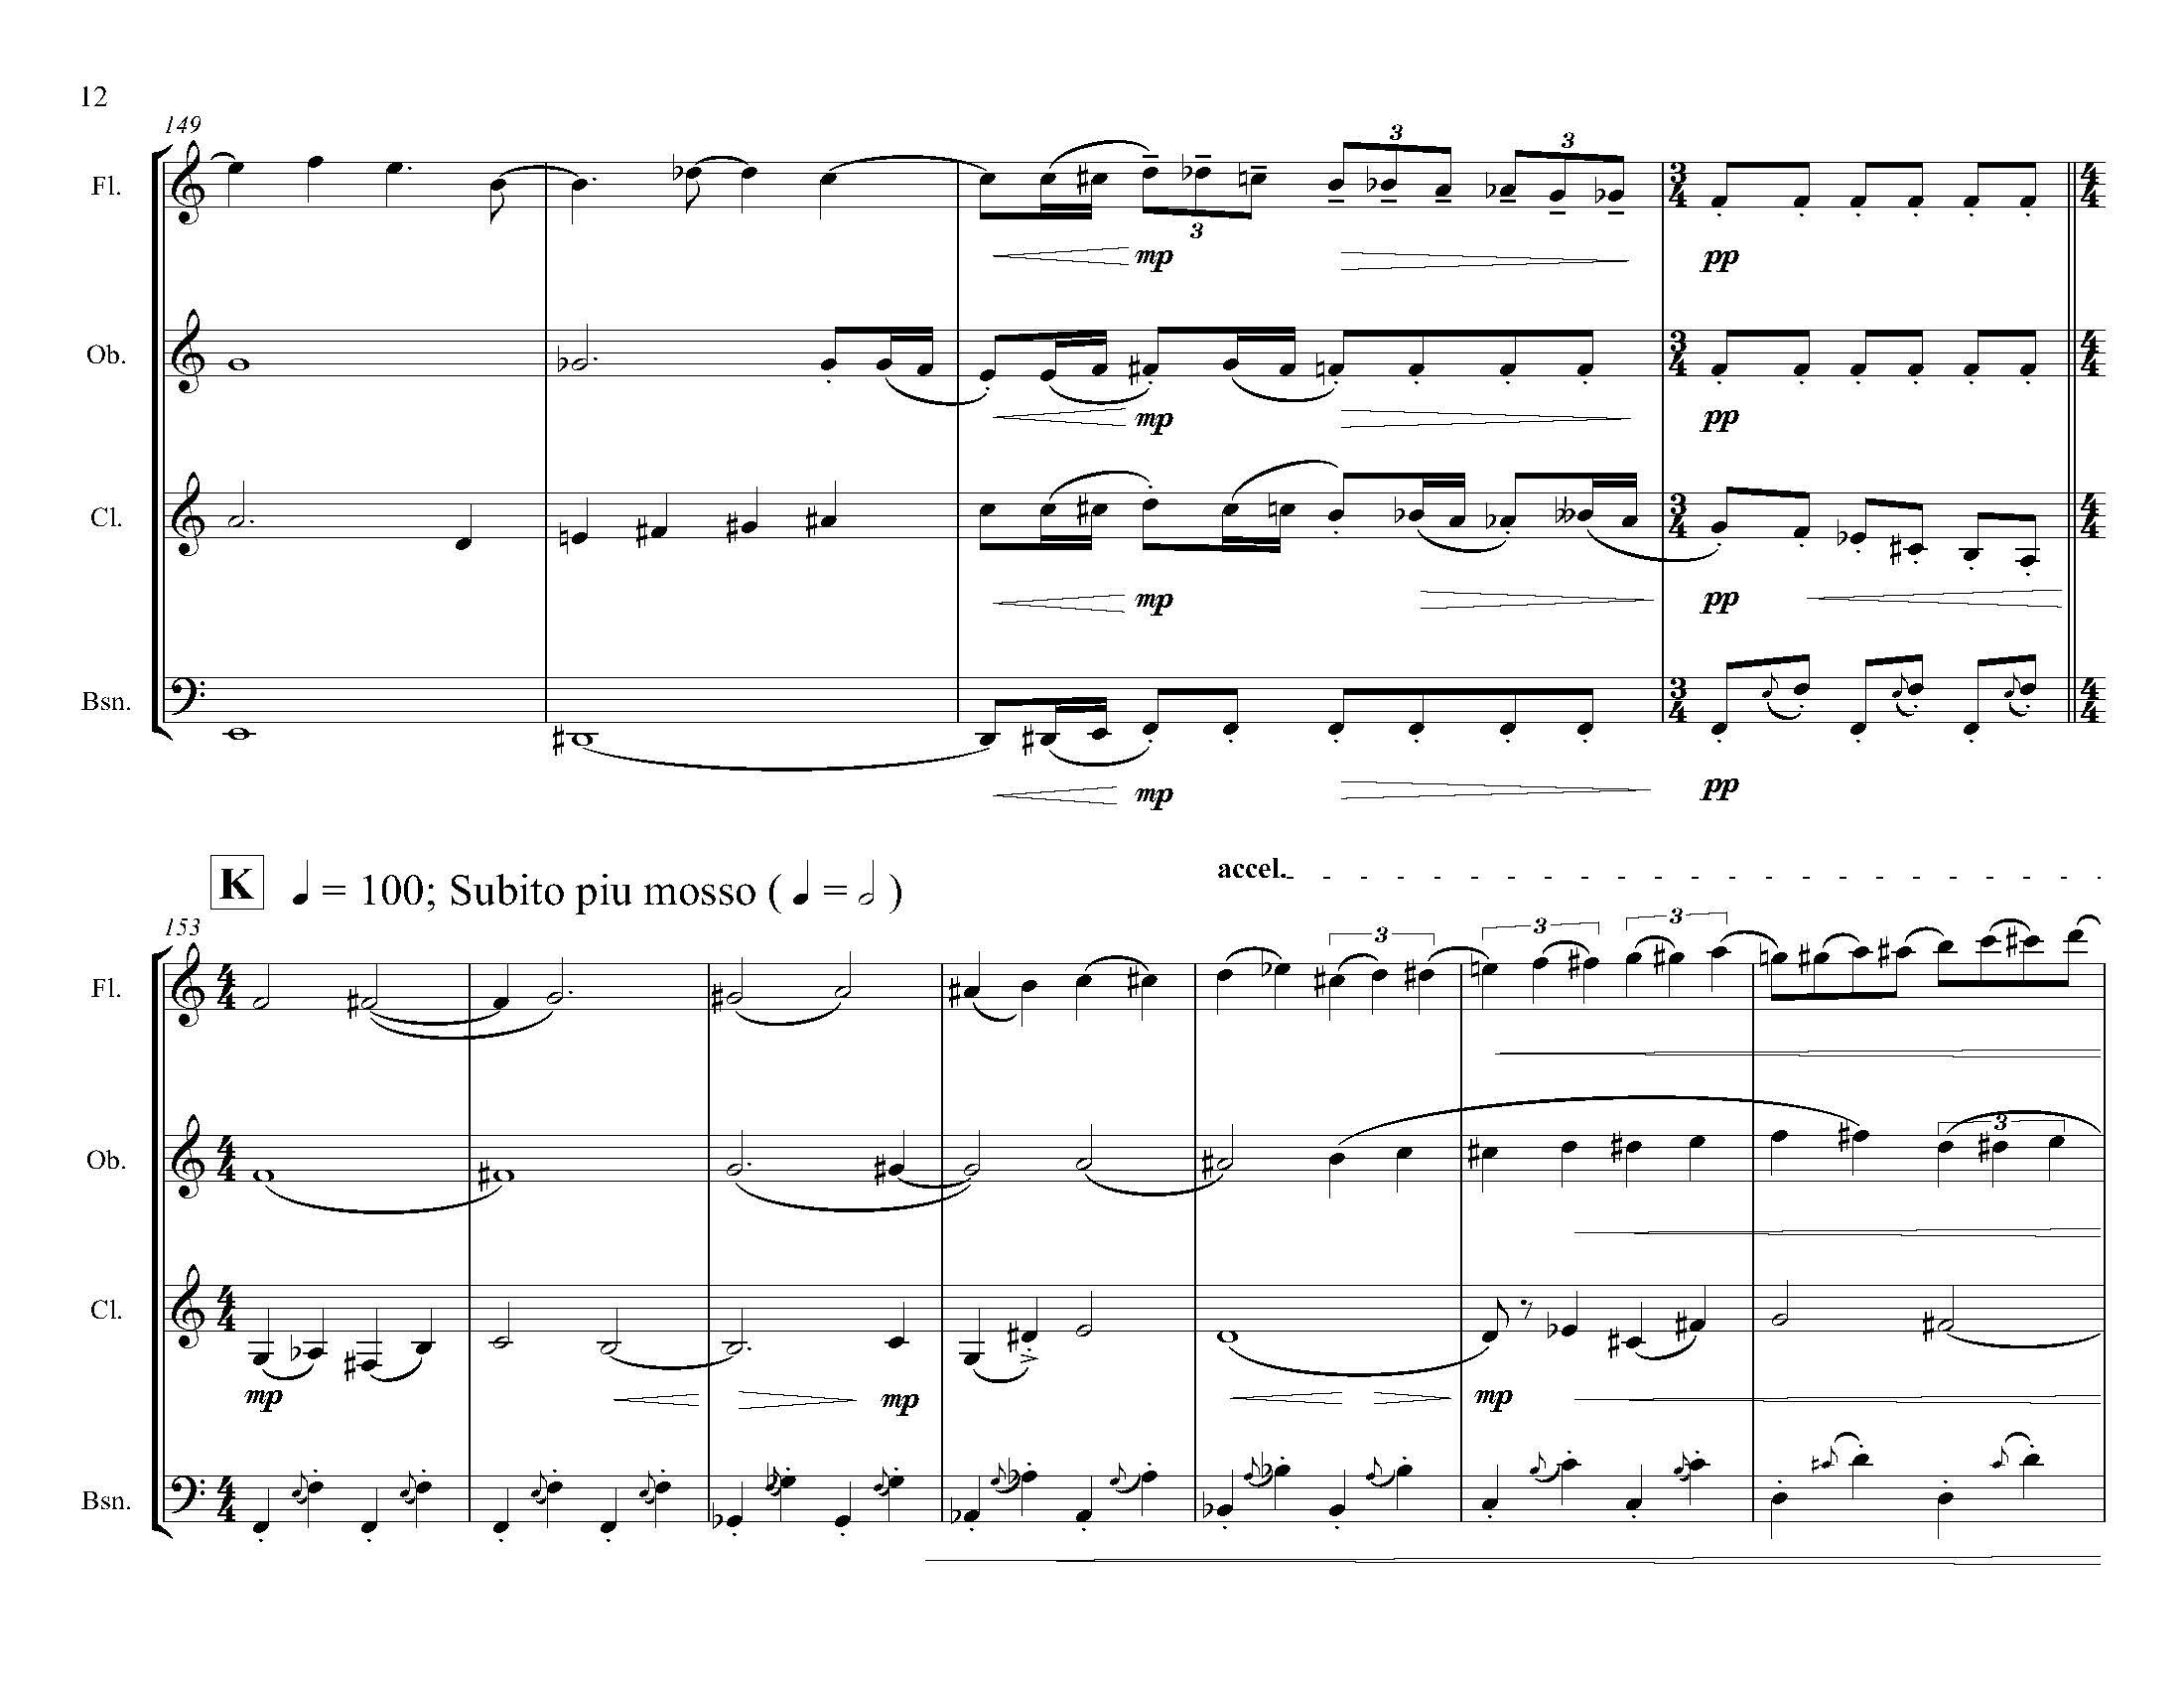 March the Twenty-Fifth - Complete Score_Page_18.jpg